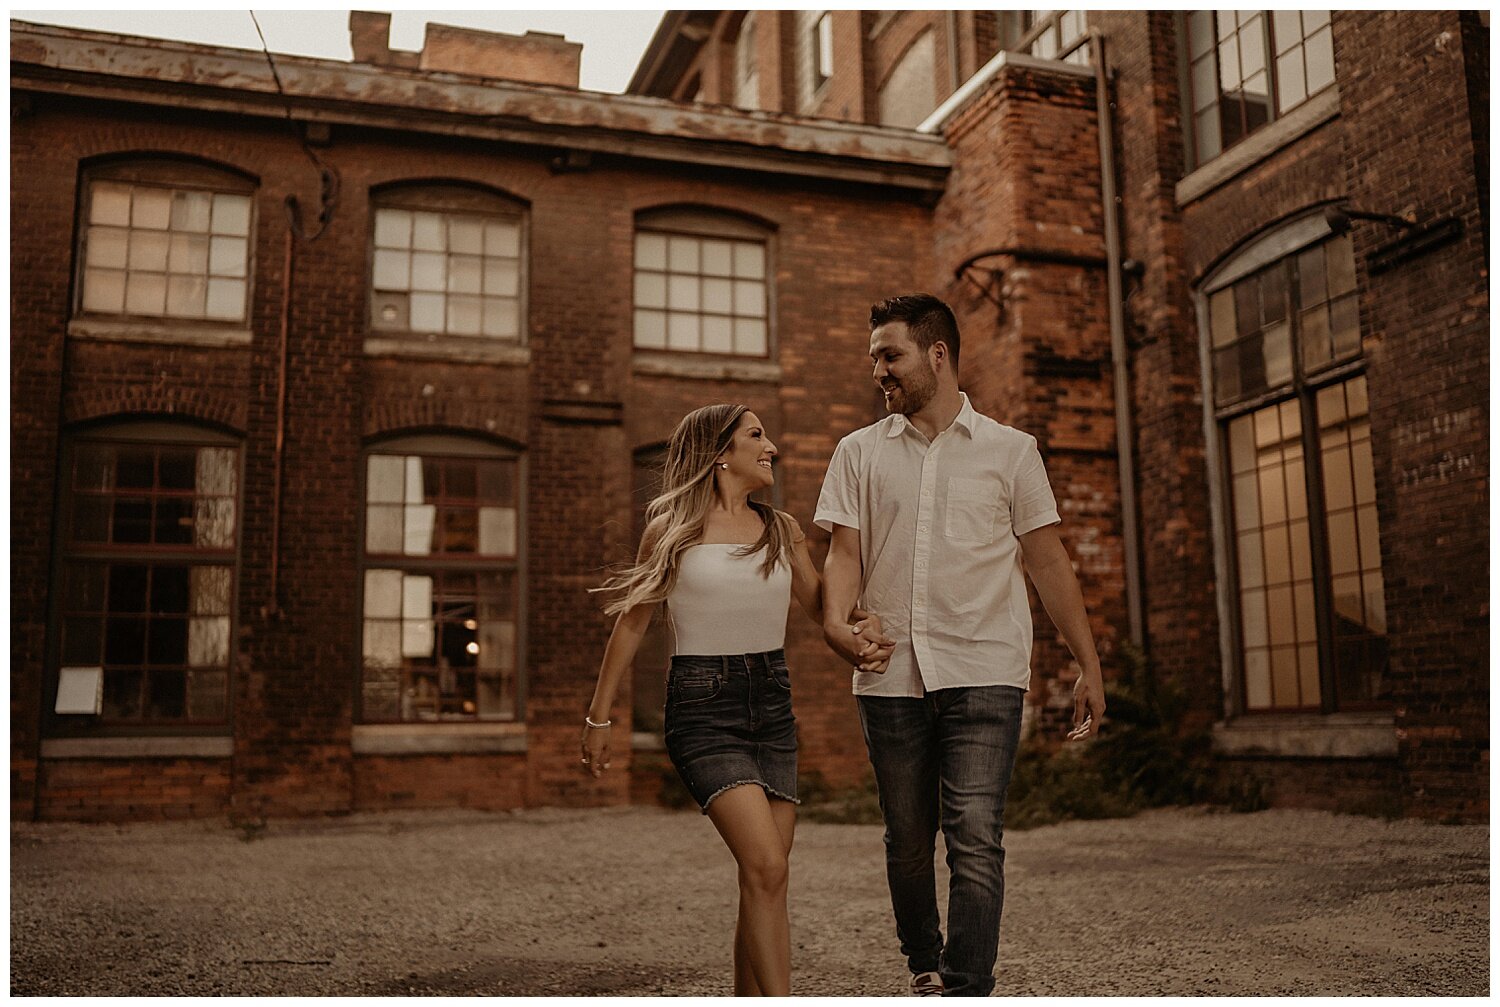 Cotton_Factory_And_Waterfall_Engagement_Session_Hamilton_Ontario_Wedding_Photographer_0066.jpg